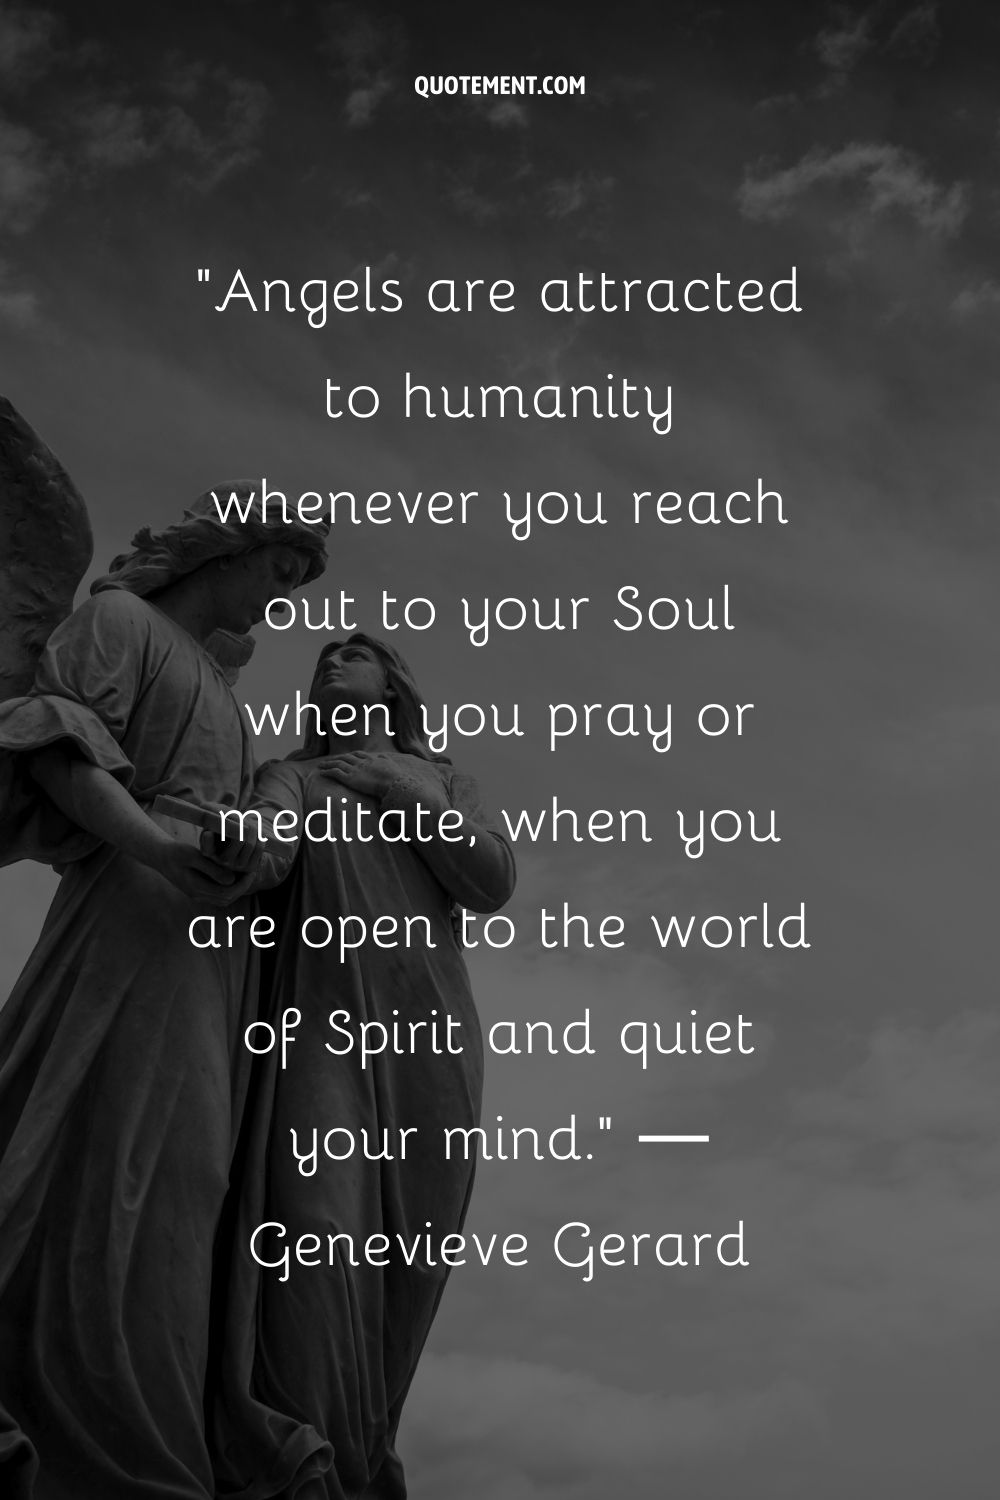 Angels are attracted to humanity whenever you reach out to your Soul when you pray